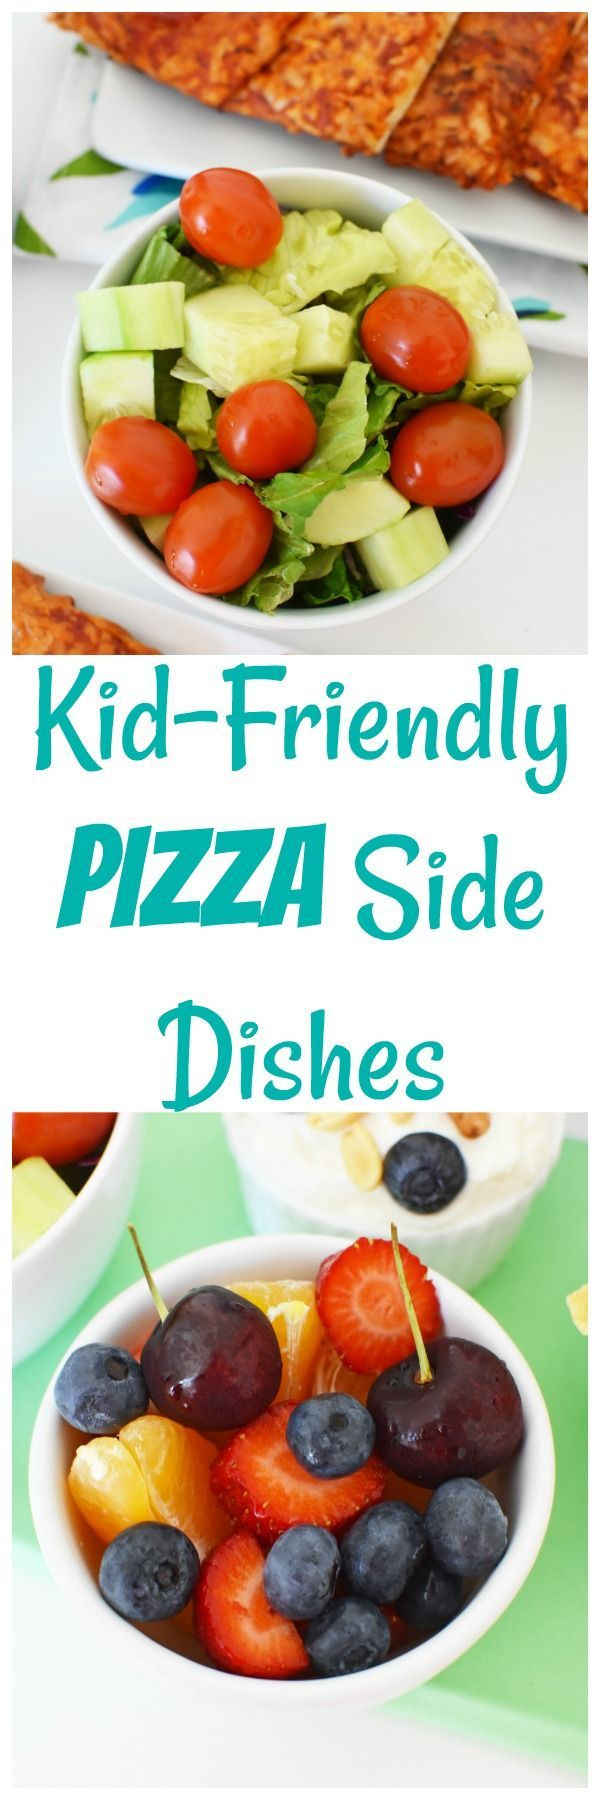 Side Dishes For Pizza Party
 Kid Friendly Pizza Side Dishes to Try Today